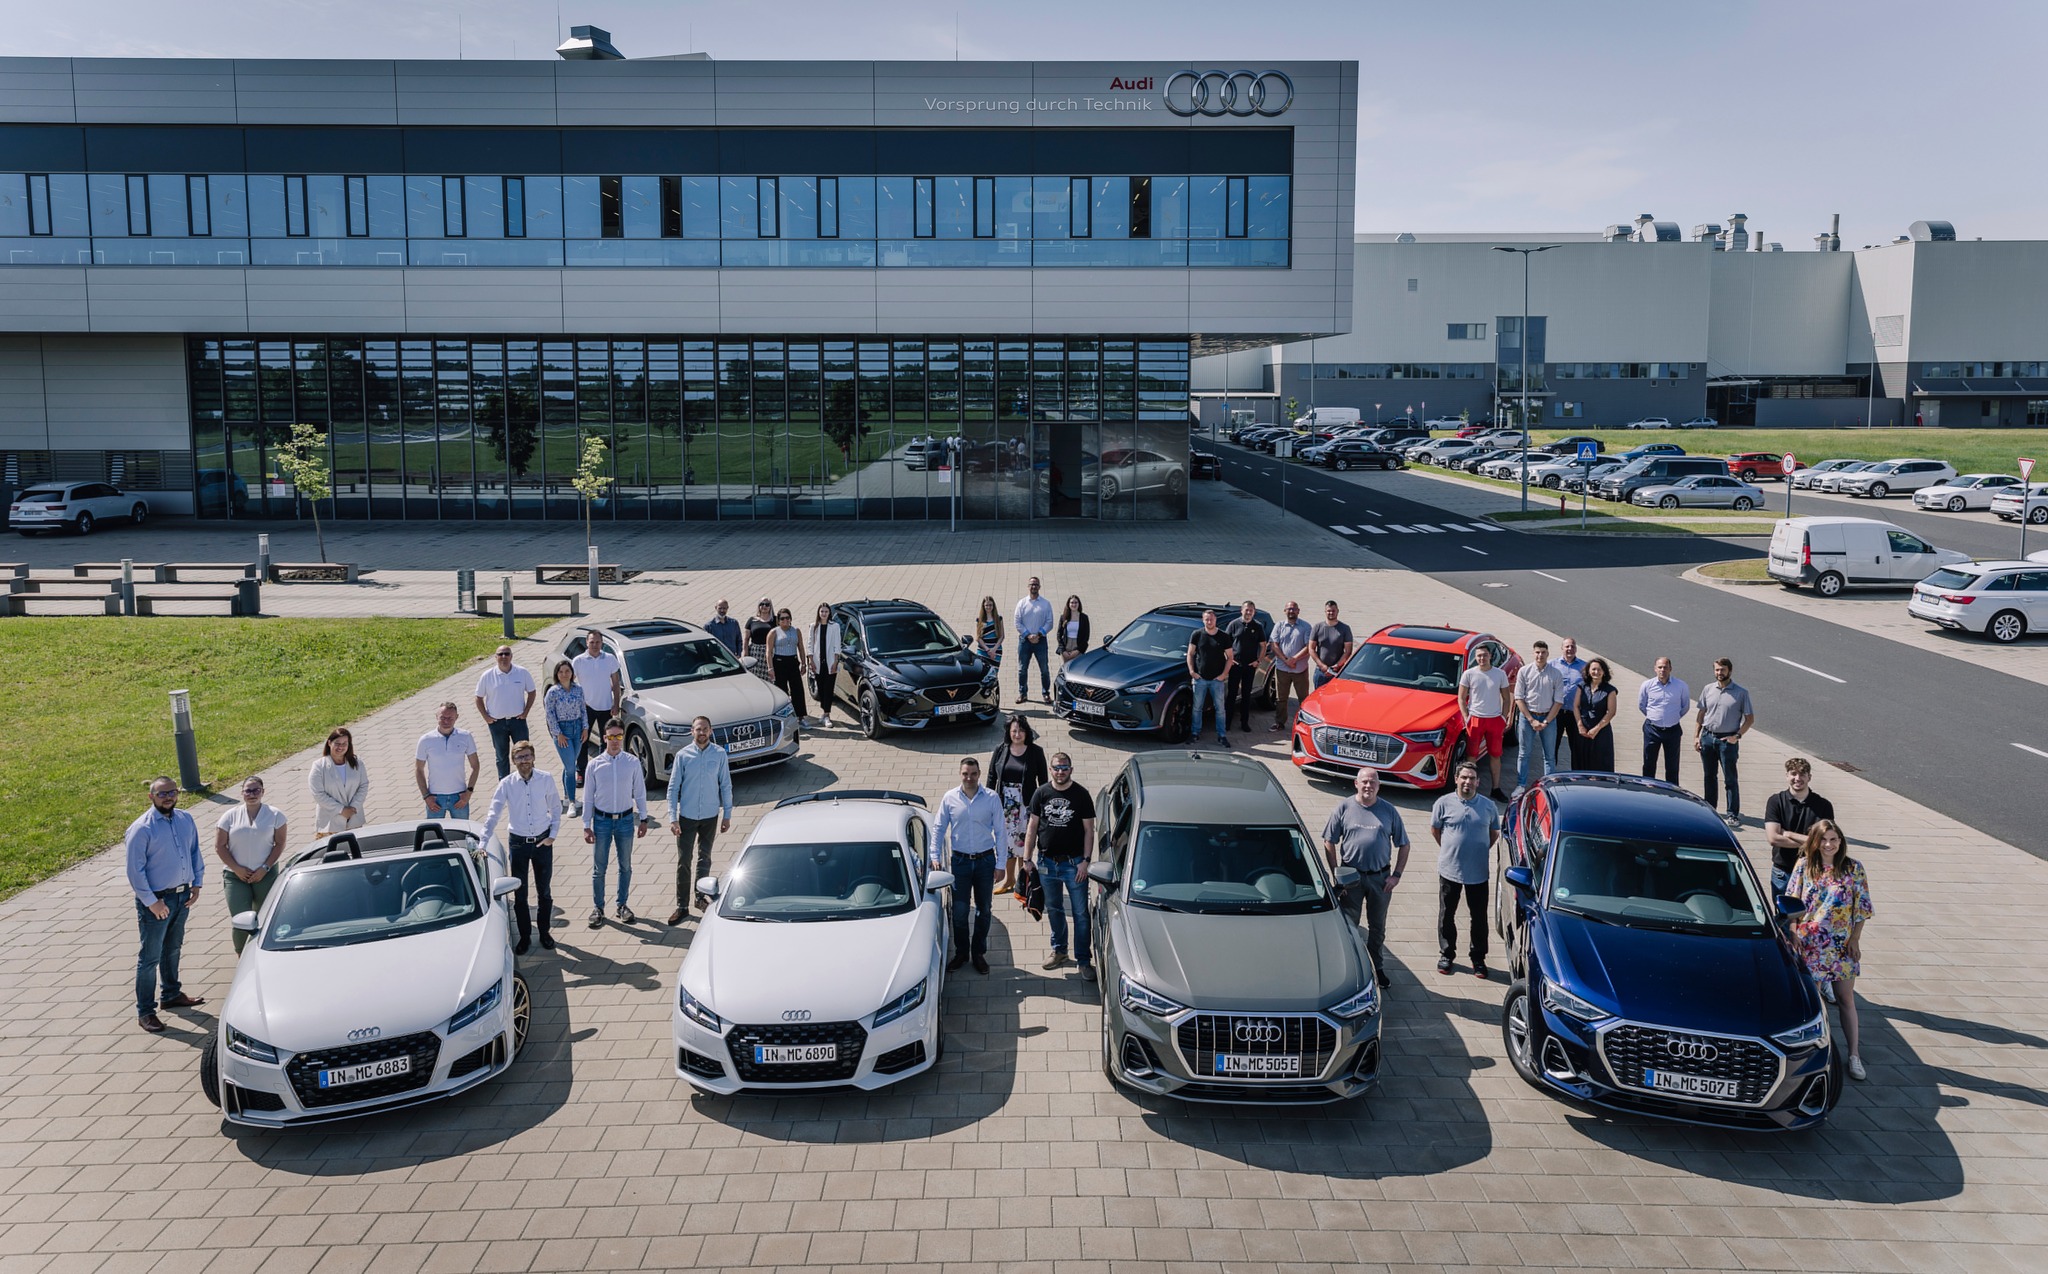 Audi Hungaria Receives Seal of Quality as Family Friendly Workplace